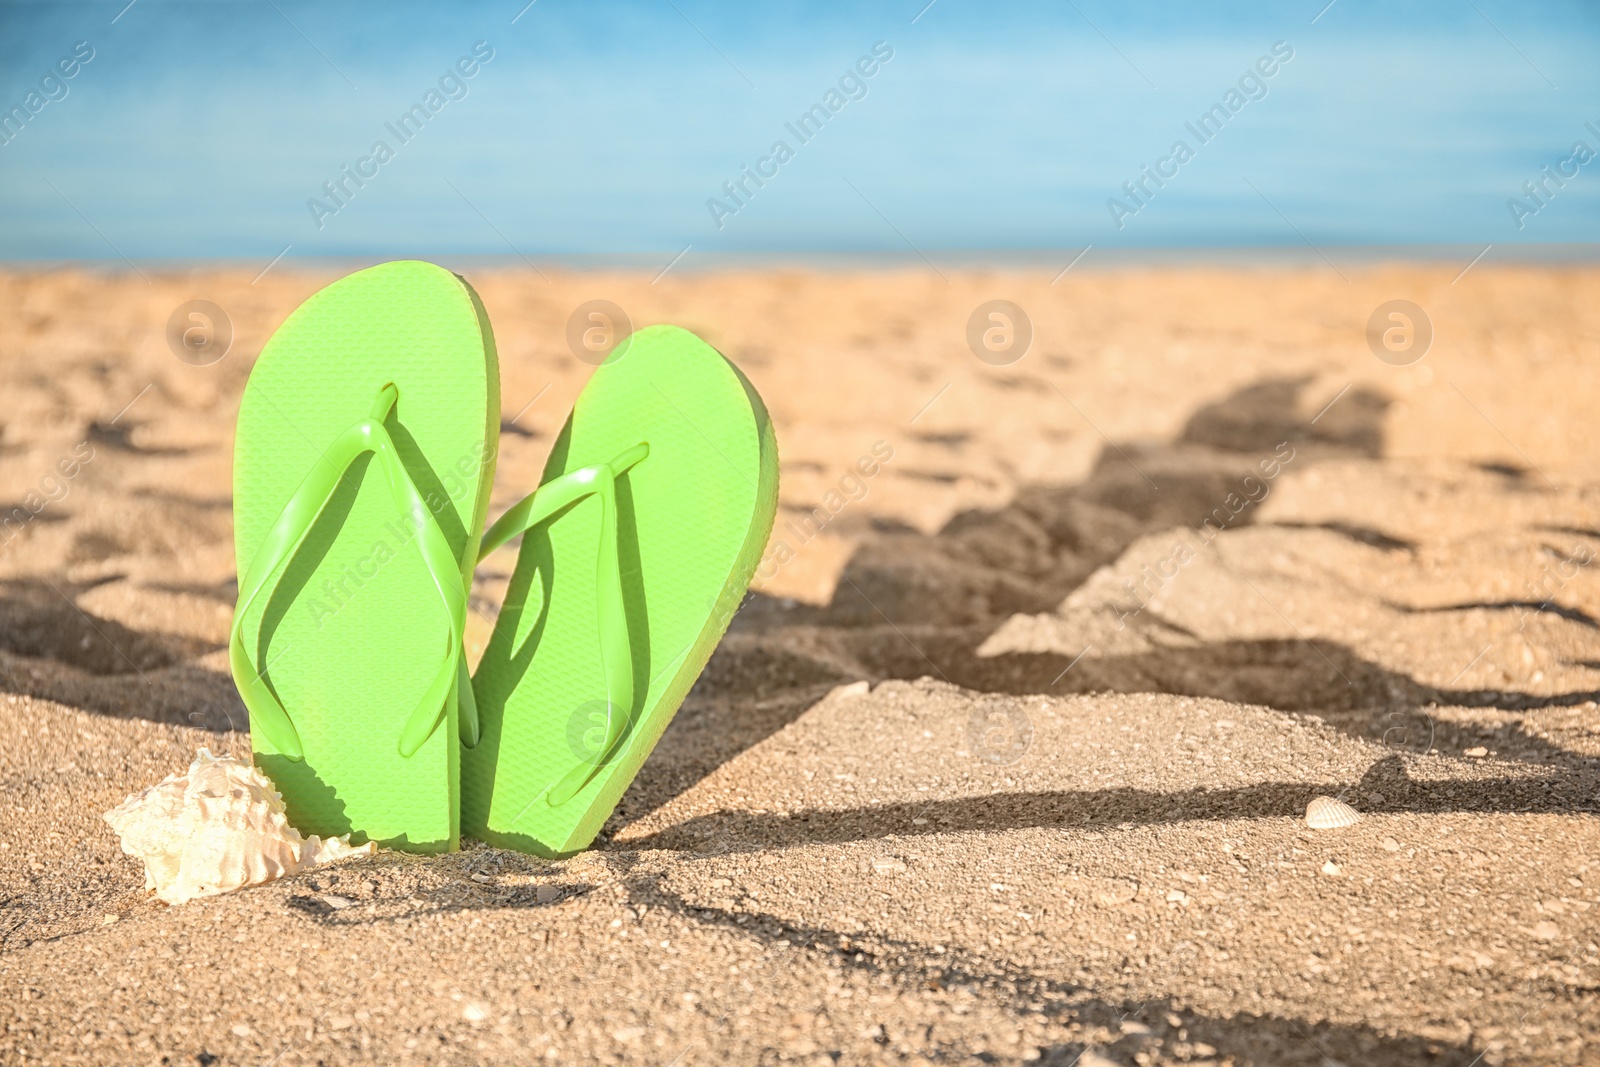 Photo of Flip-flops in sand on beach. Space for text